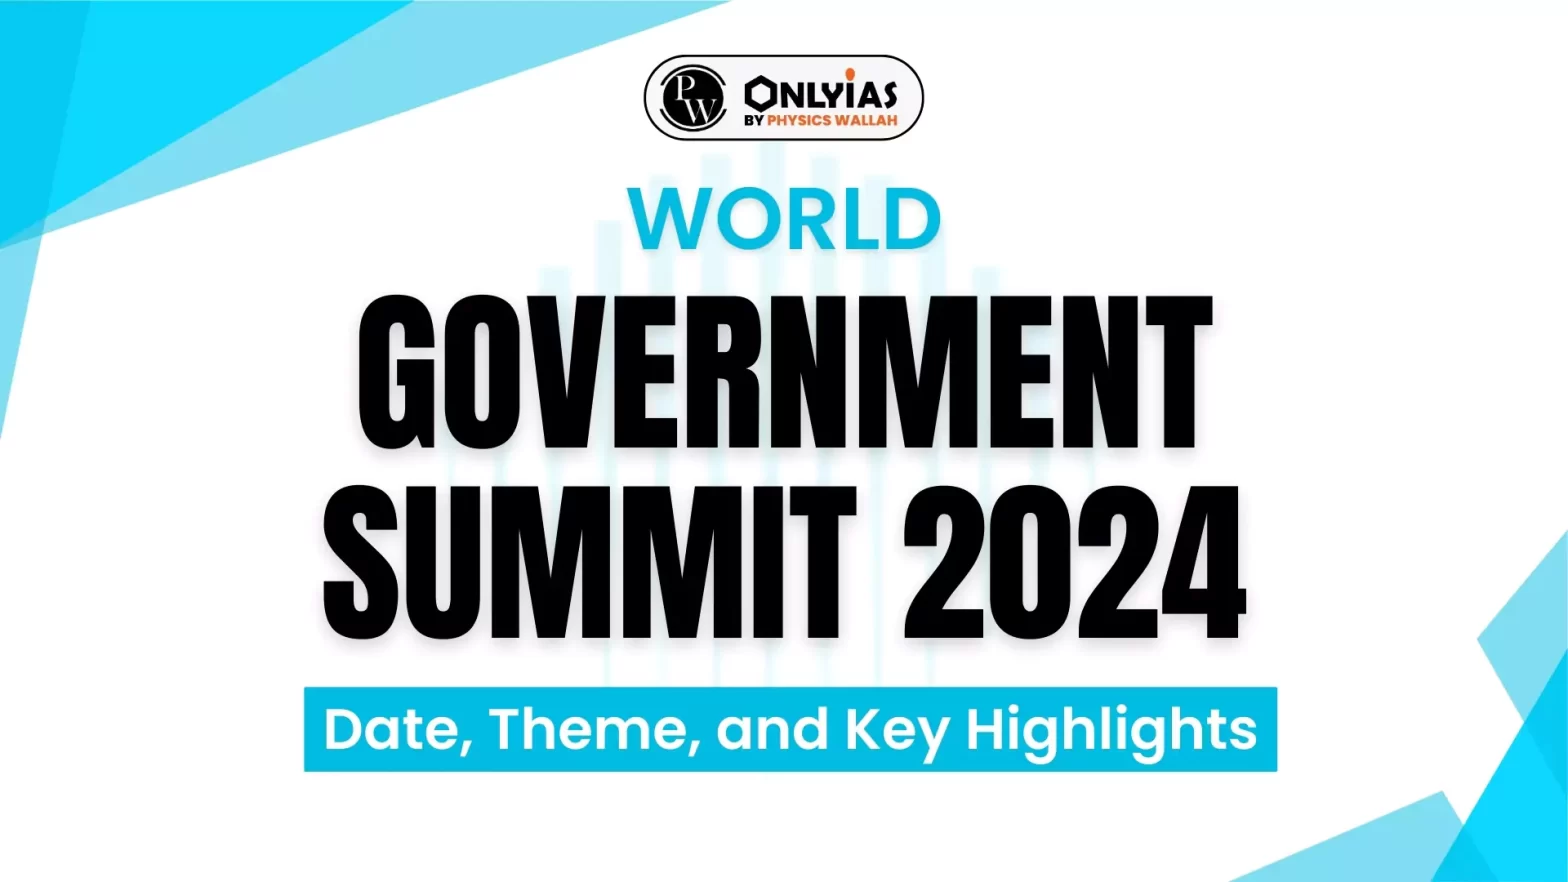 World Government Summit 2024: Date, Theme, and Key Highlights